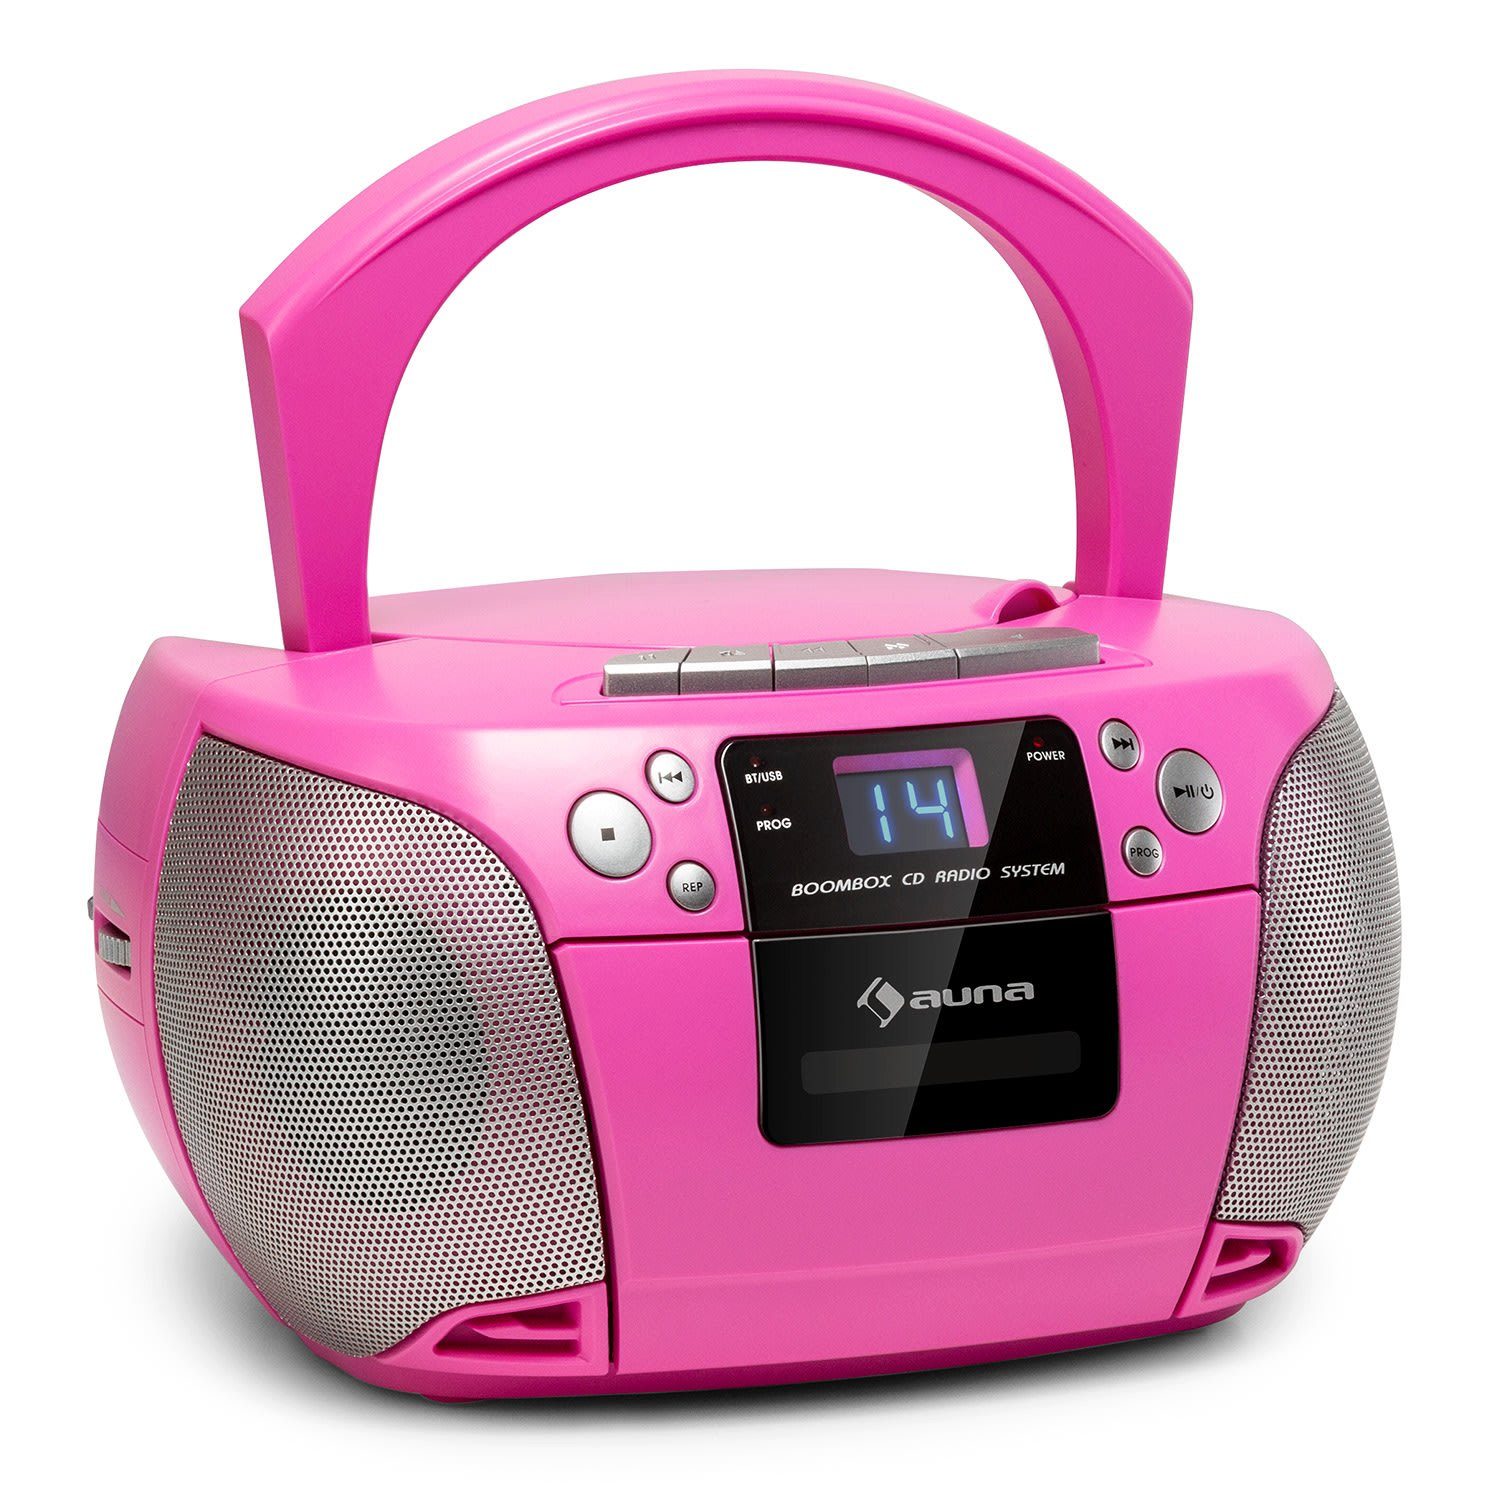 Farben Boombox Stereoanlage Radio CD-Player Bluetooth Kassette UKW AUX USB vers 